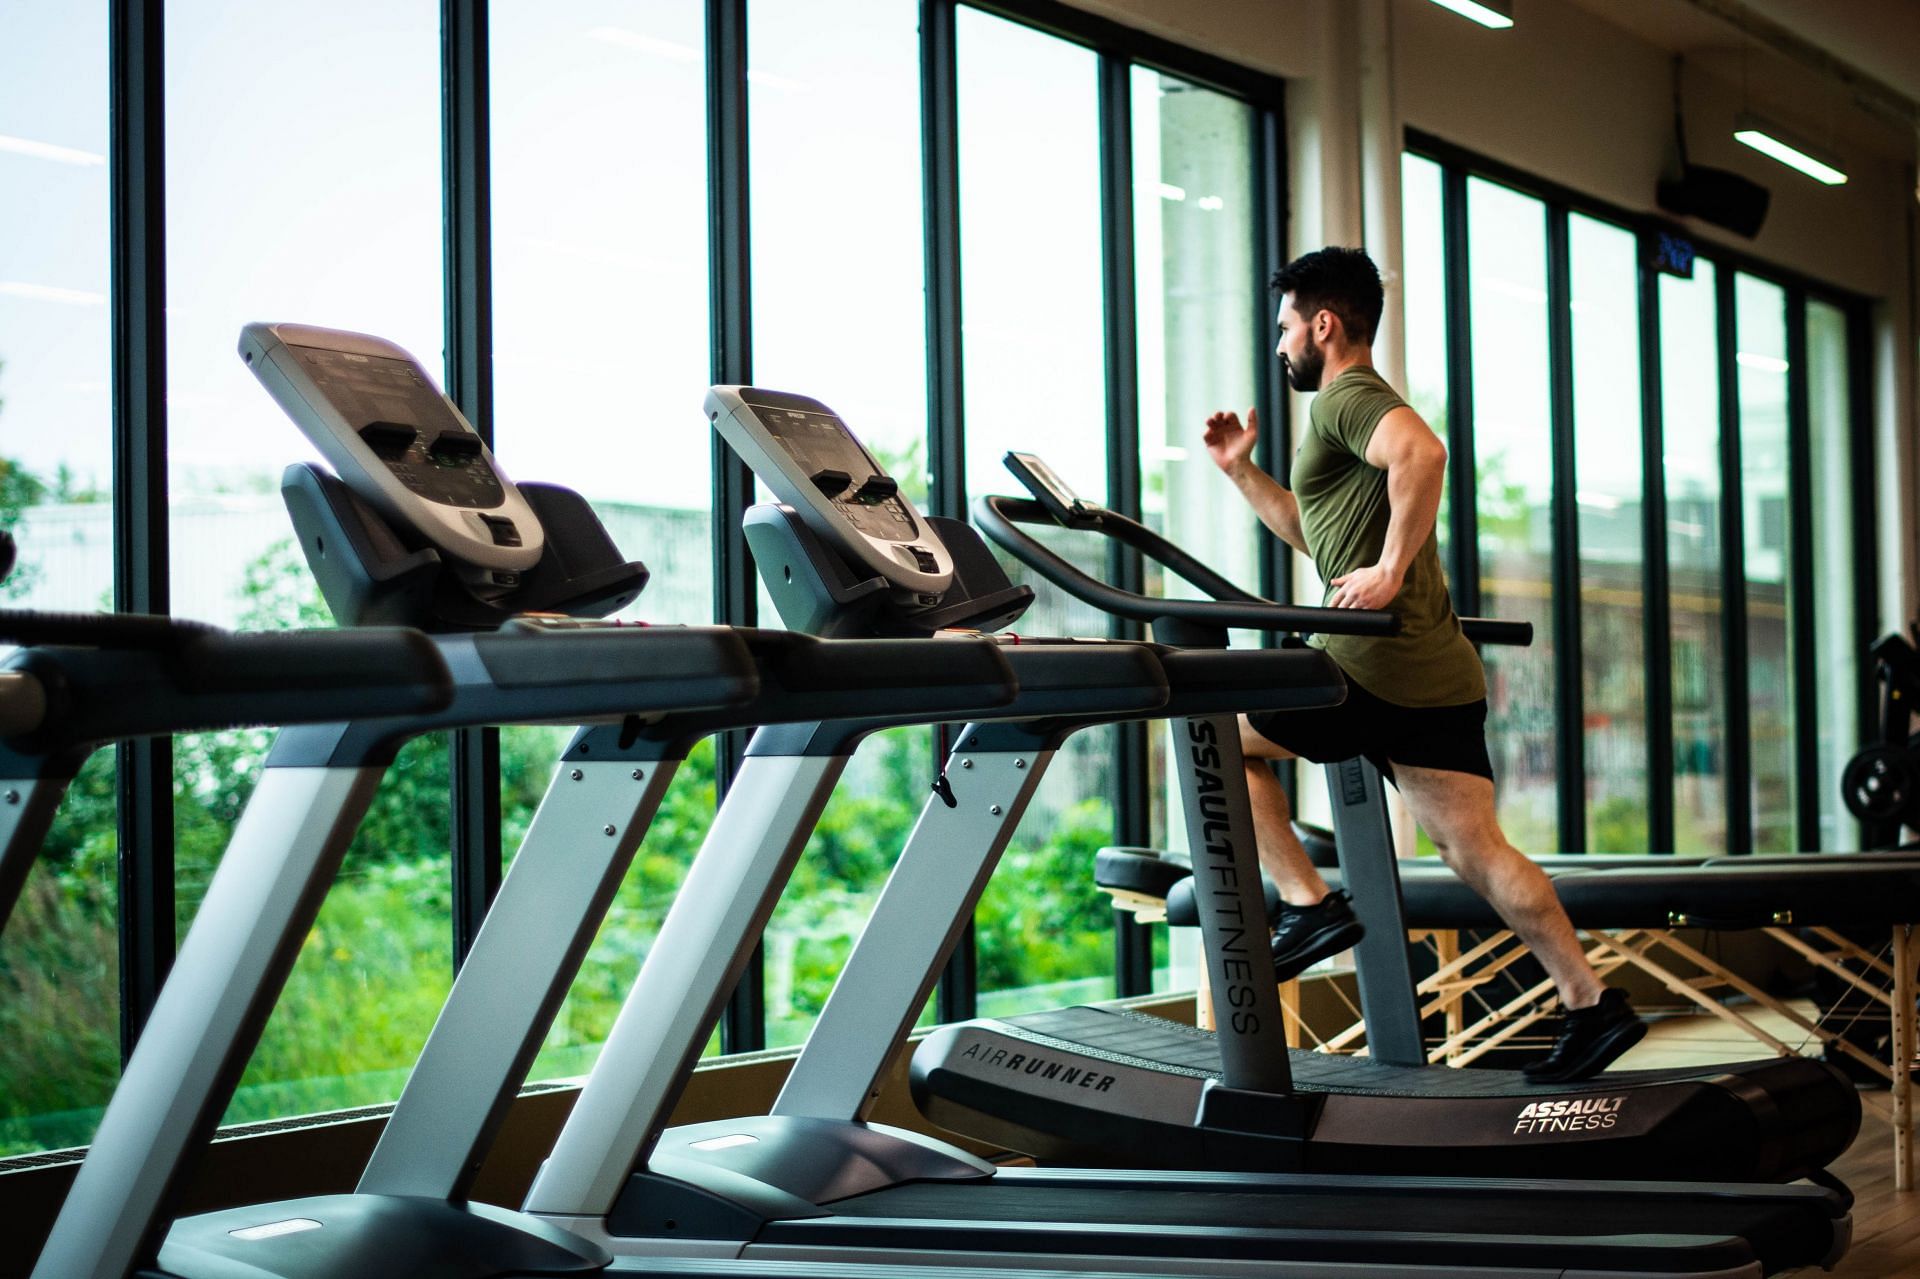 Start by doing 30 minutes of cardio each day. (Photo via Pexels/William Choquette)